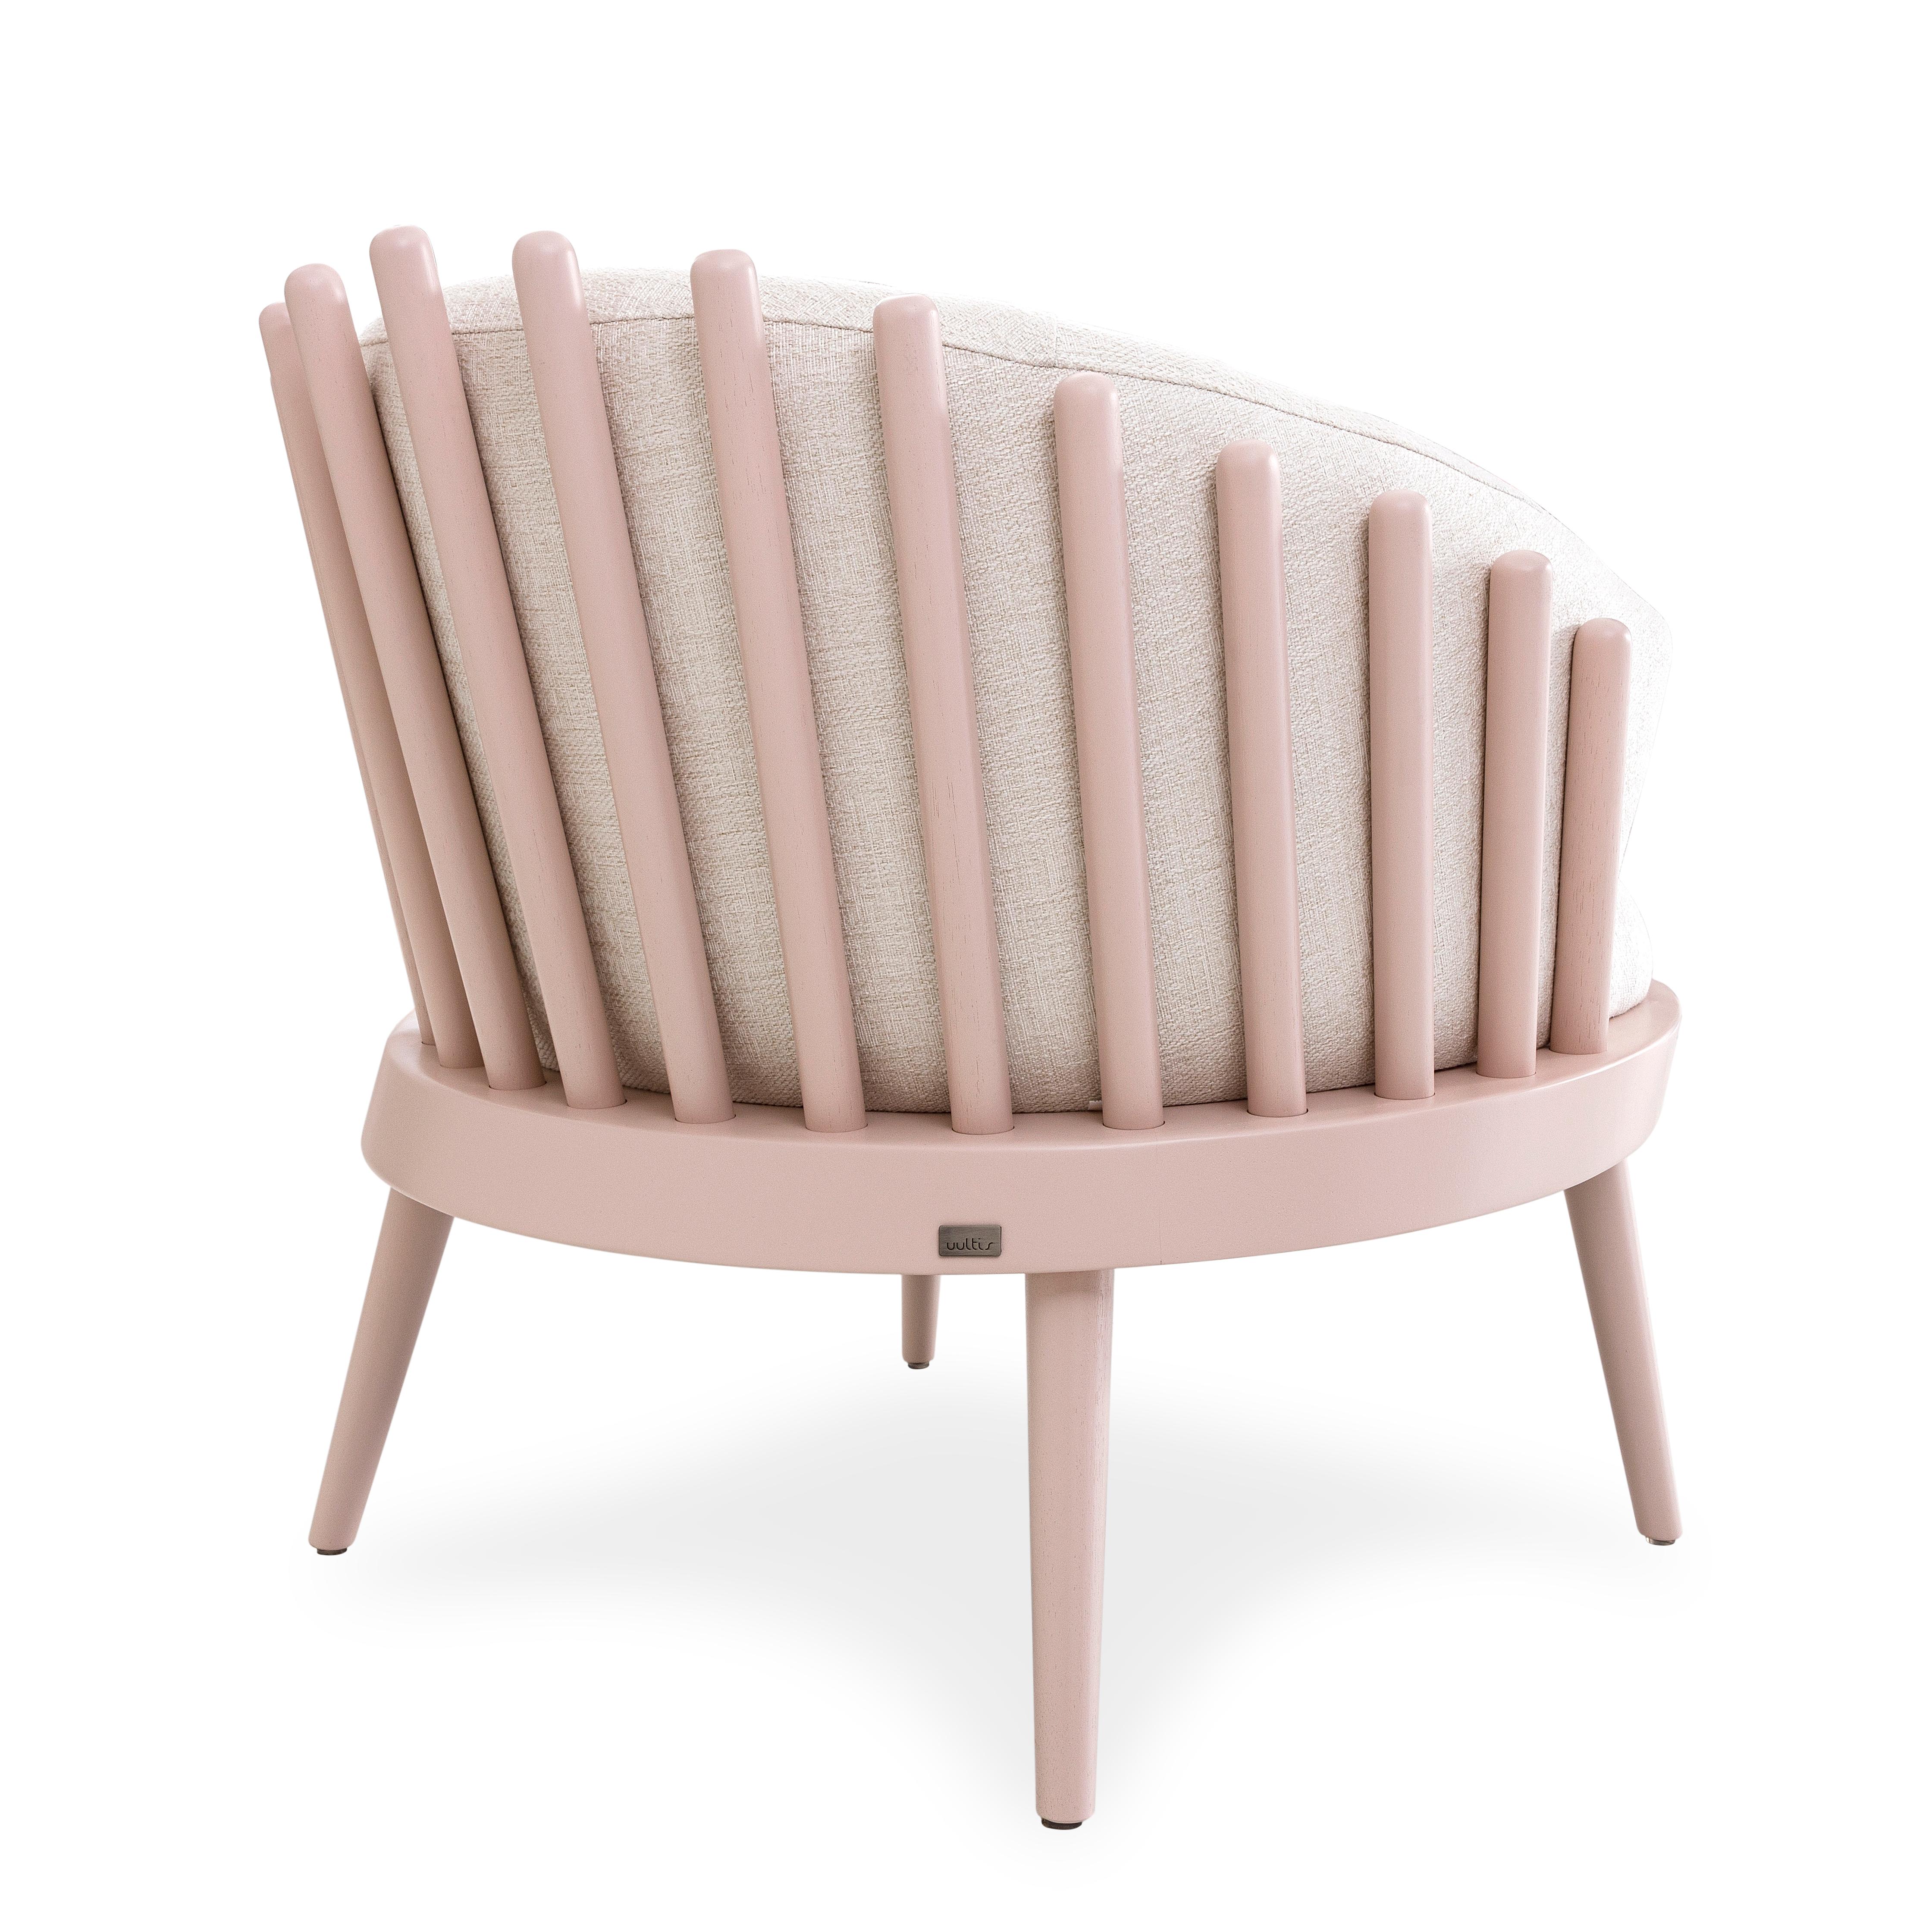 Fane Upholstered Armchair in Quartz Wood Finish and White Fabric In New Condition For Sale In Miami, FL